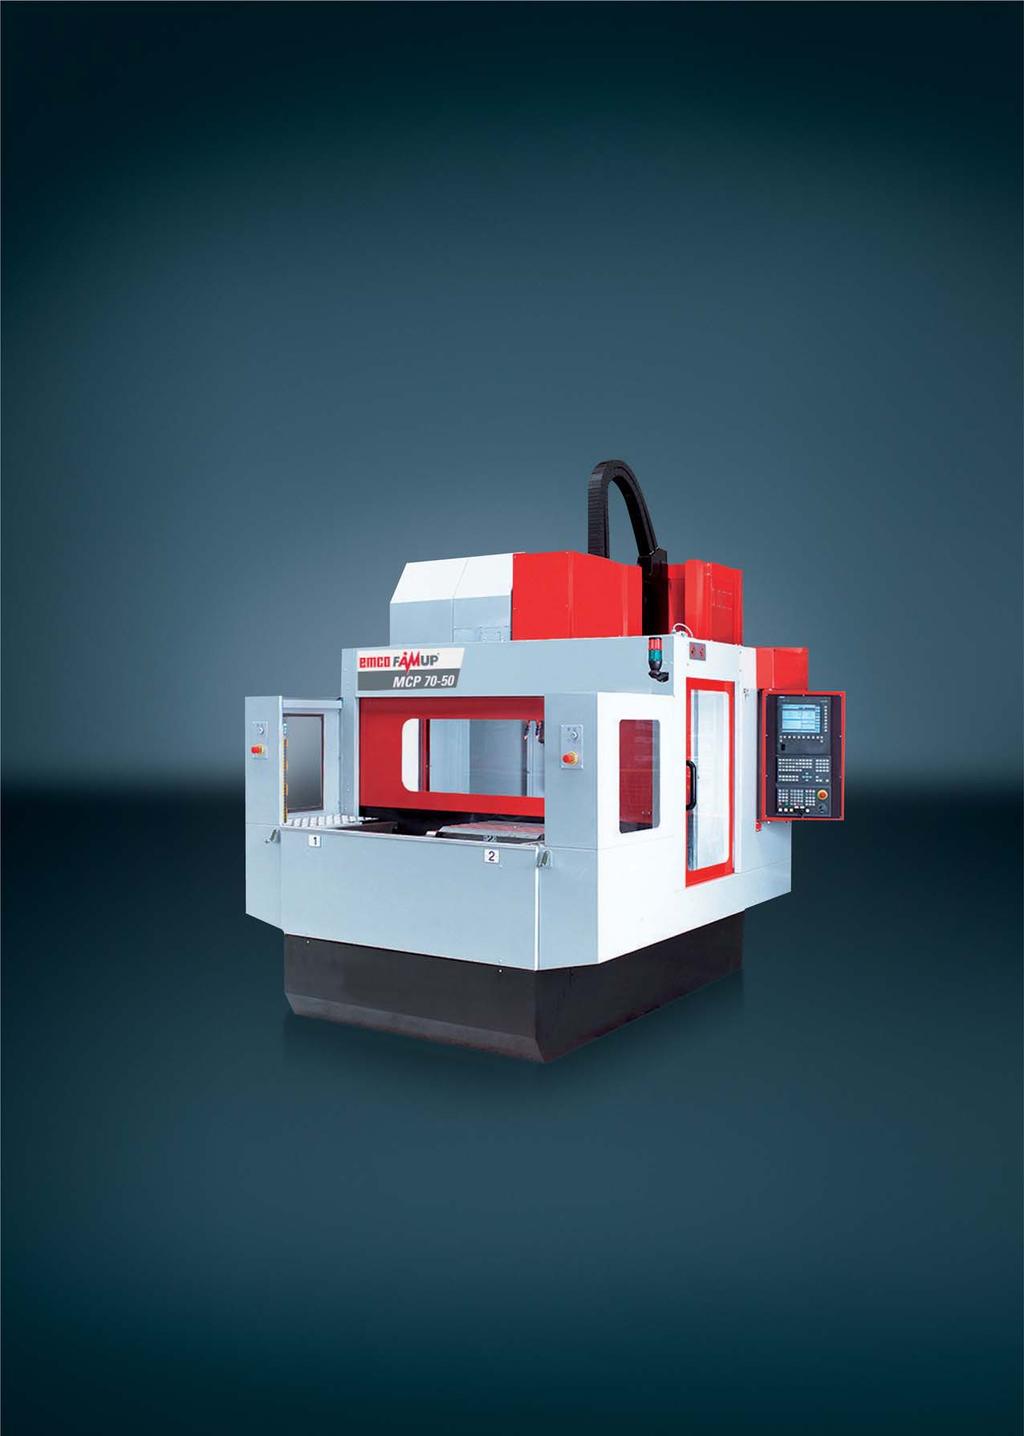 MCP 70-50 and MCP 100-50 The EMCO FAMUP MCP series. CNC vertical machining centers with the latest generation of pallet changers.